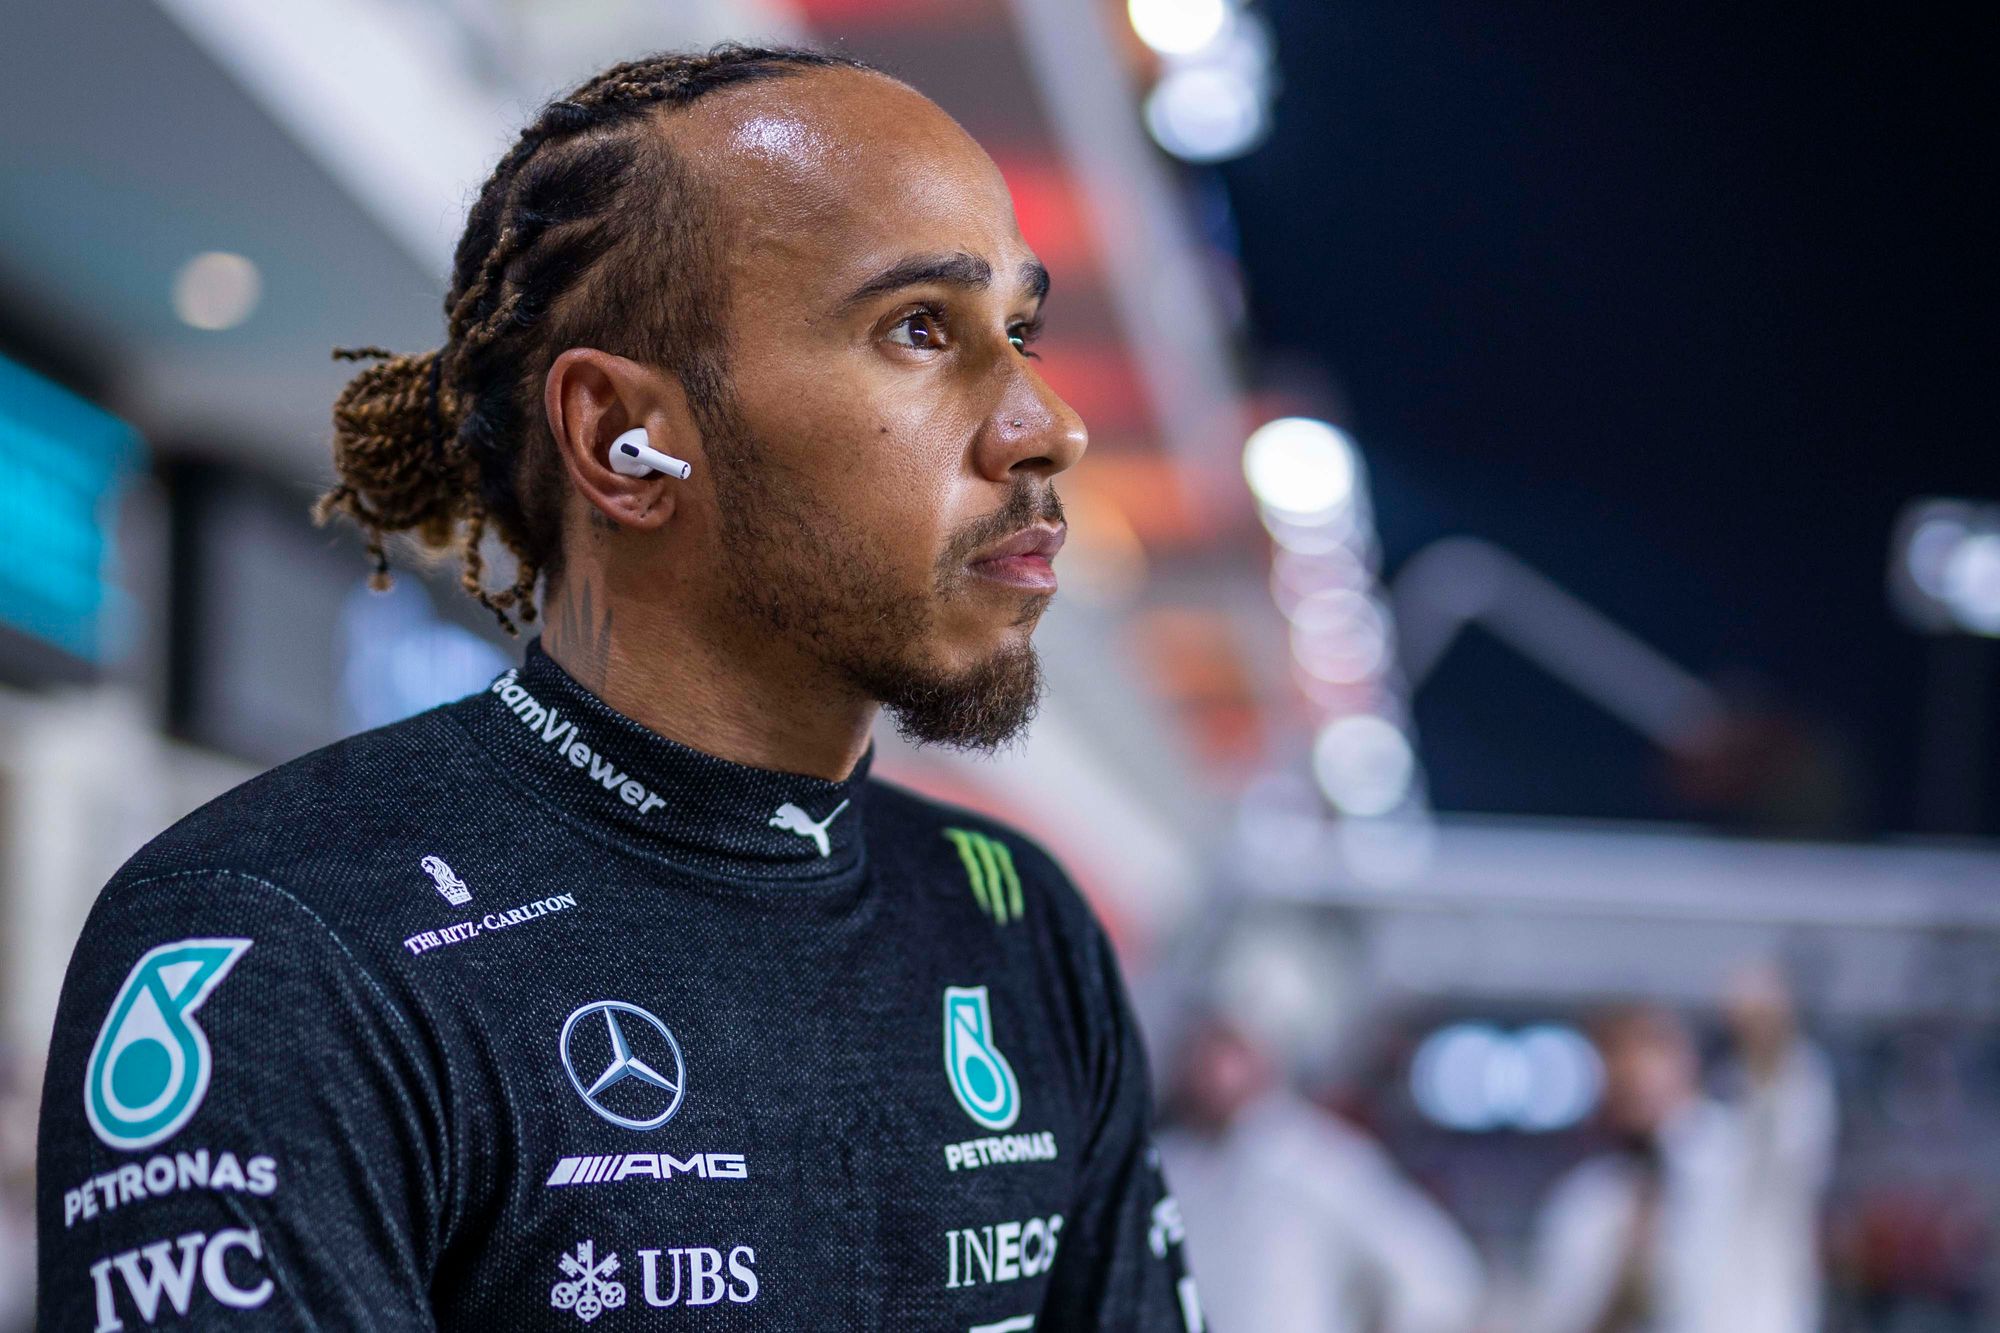 Hamilton wasn't 'singled out' - But his FIA criticism is valid - The Race